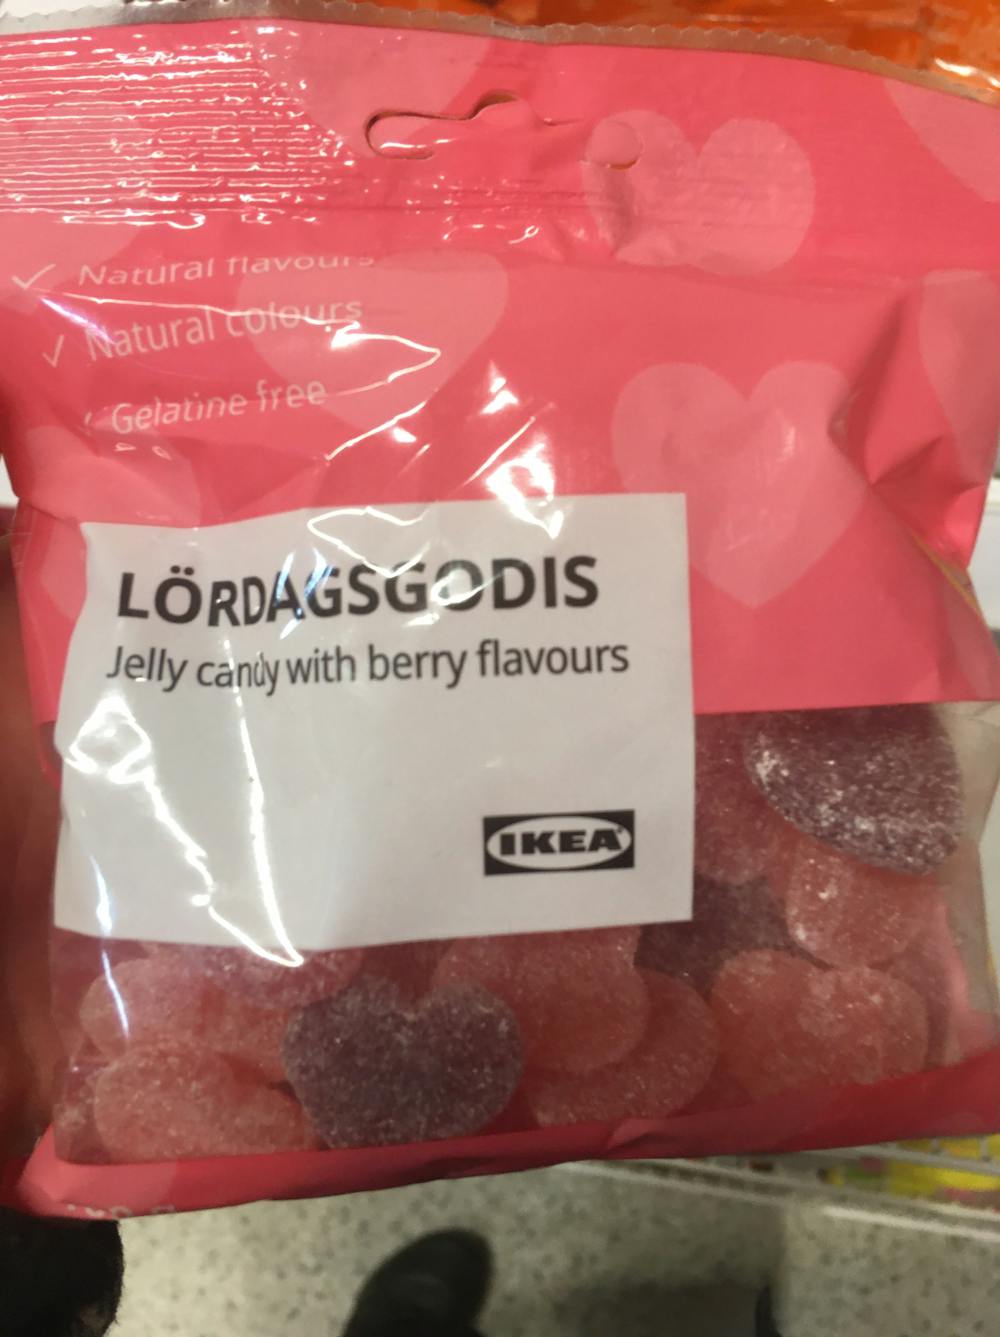 Lördagsgodis, jelly candy with berry flavour, IKEA